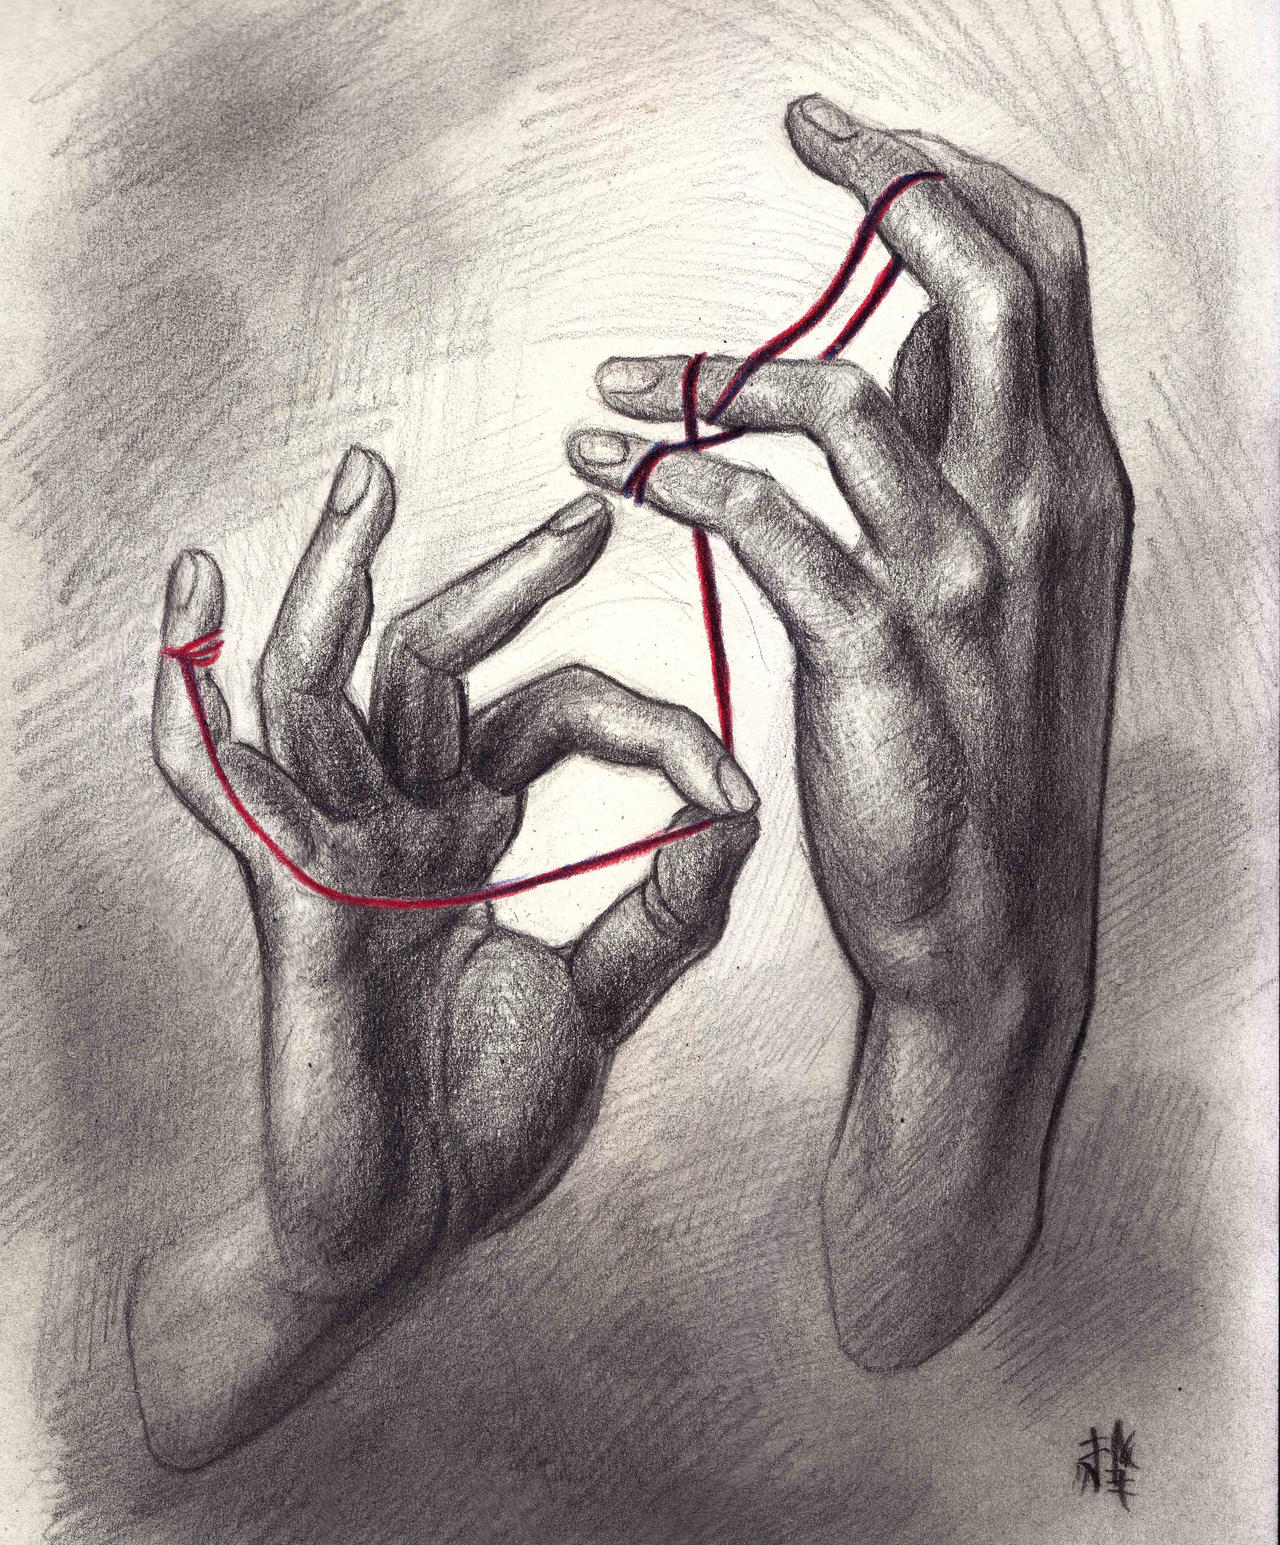 Red string of fate by hanykayal on DeviantArt